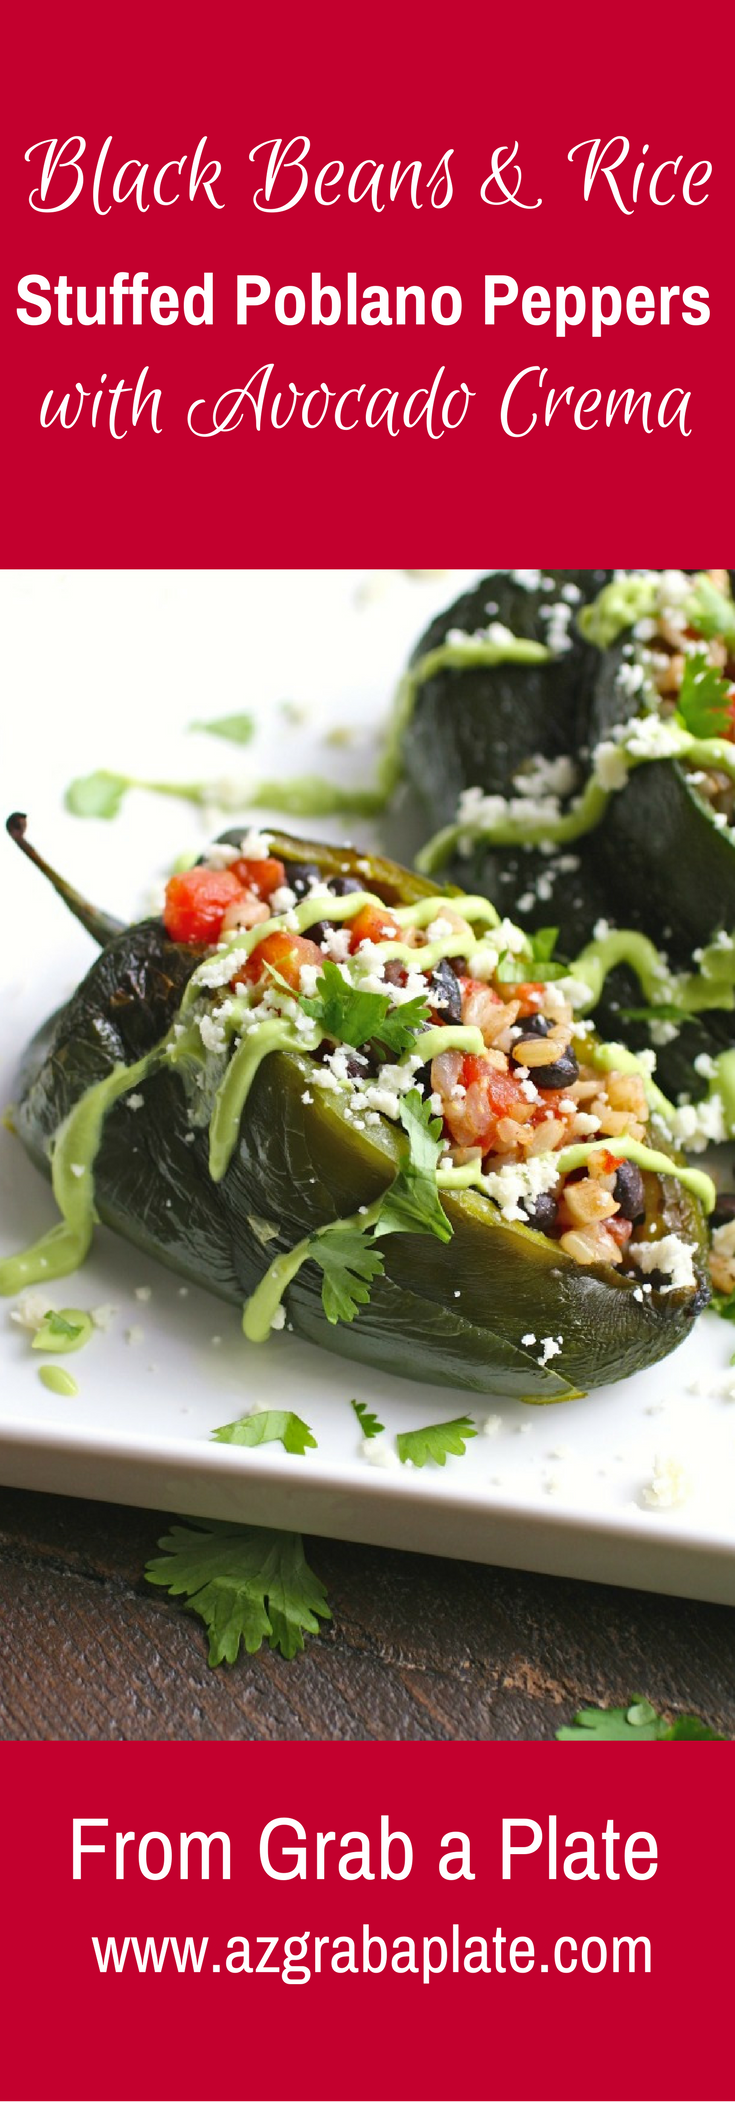 Black Beans and Rice Stuffed Poblano Peppers with Avocado Cream make a wonderful, comforting meal!